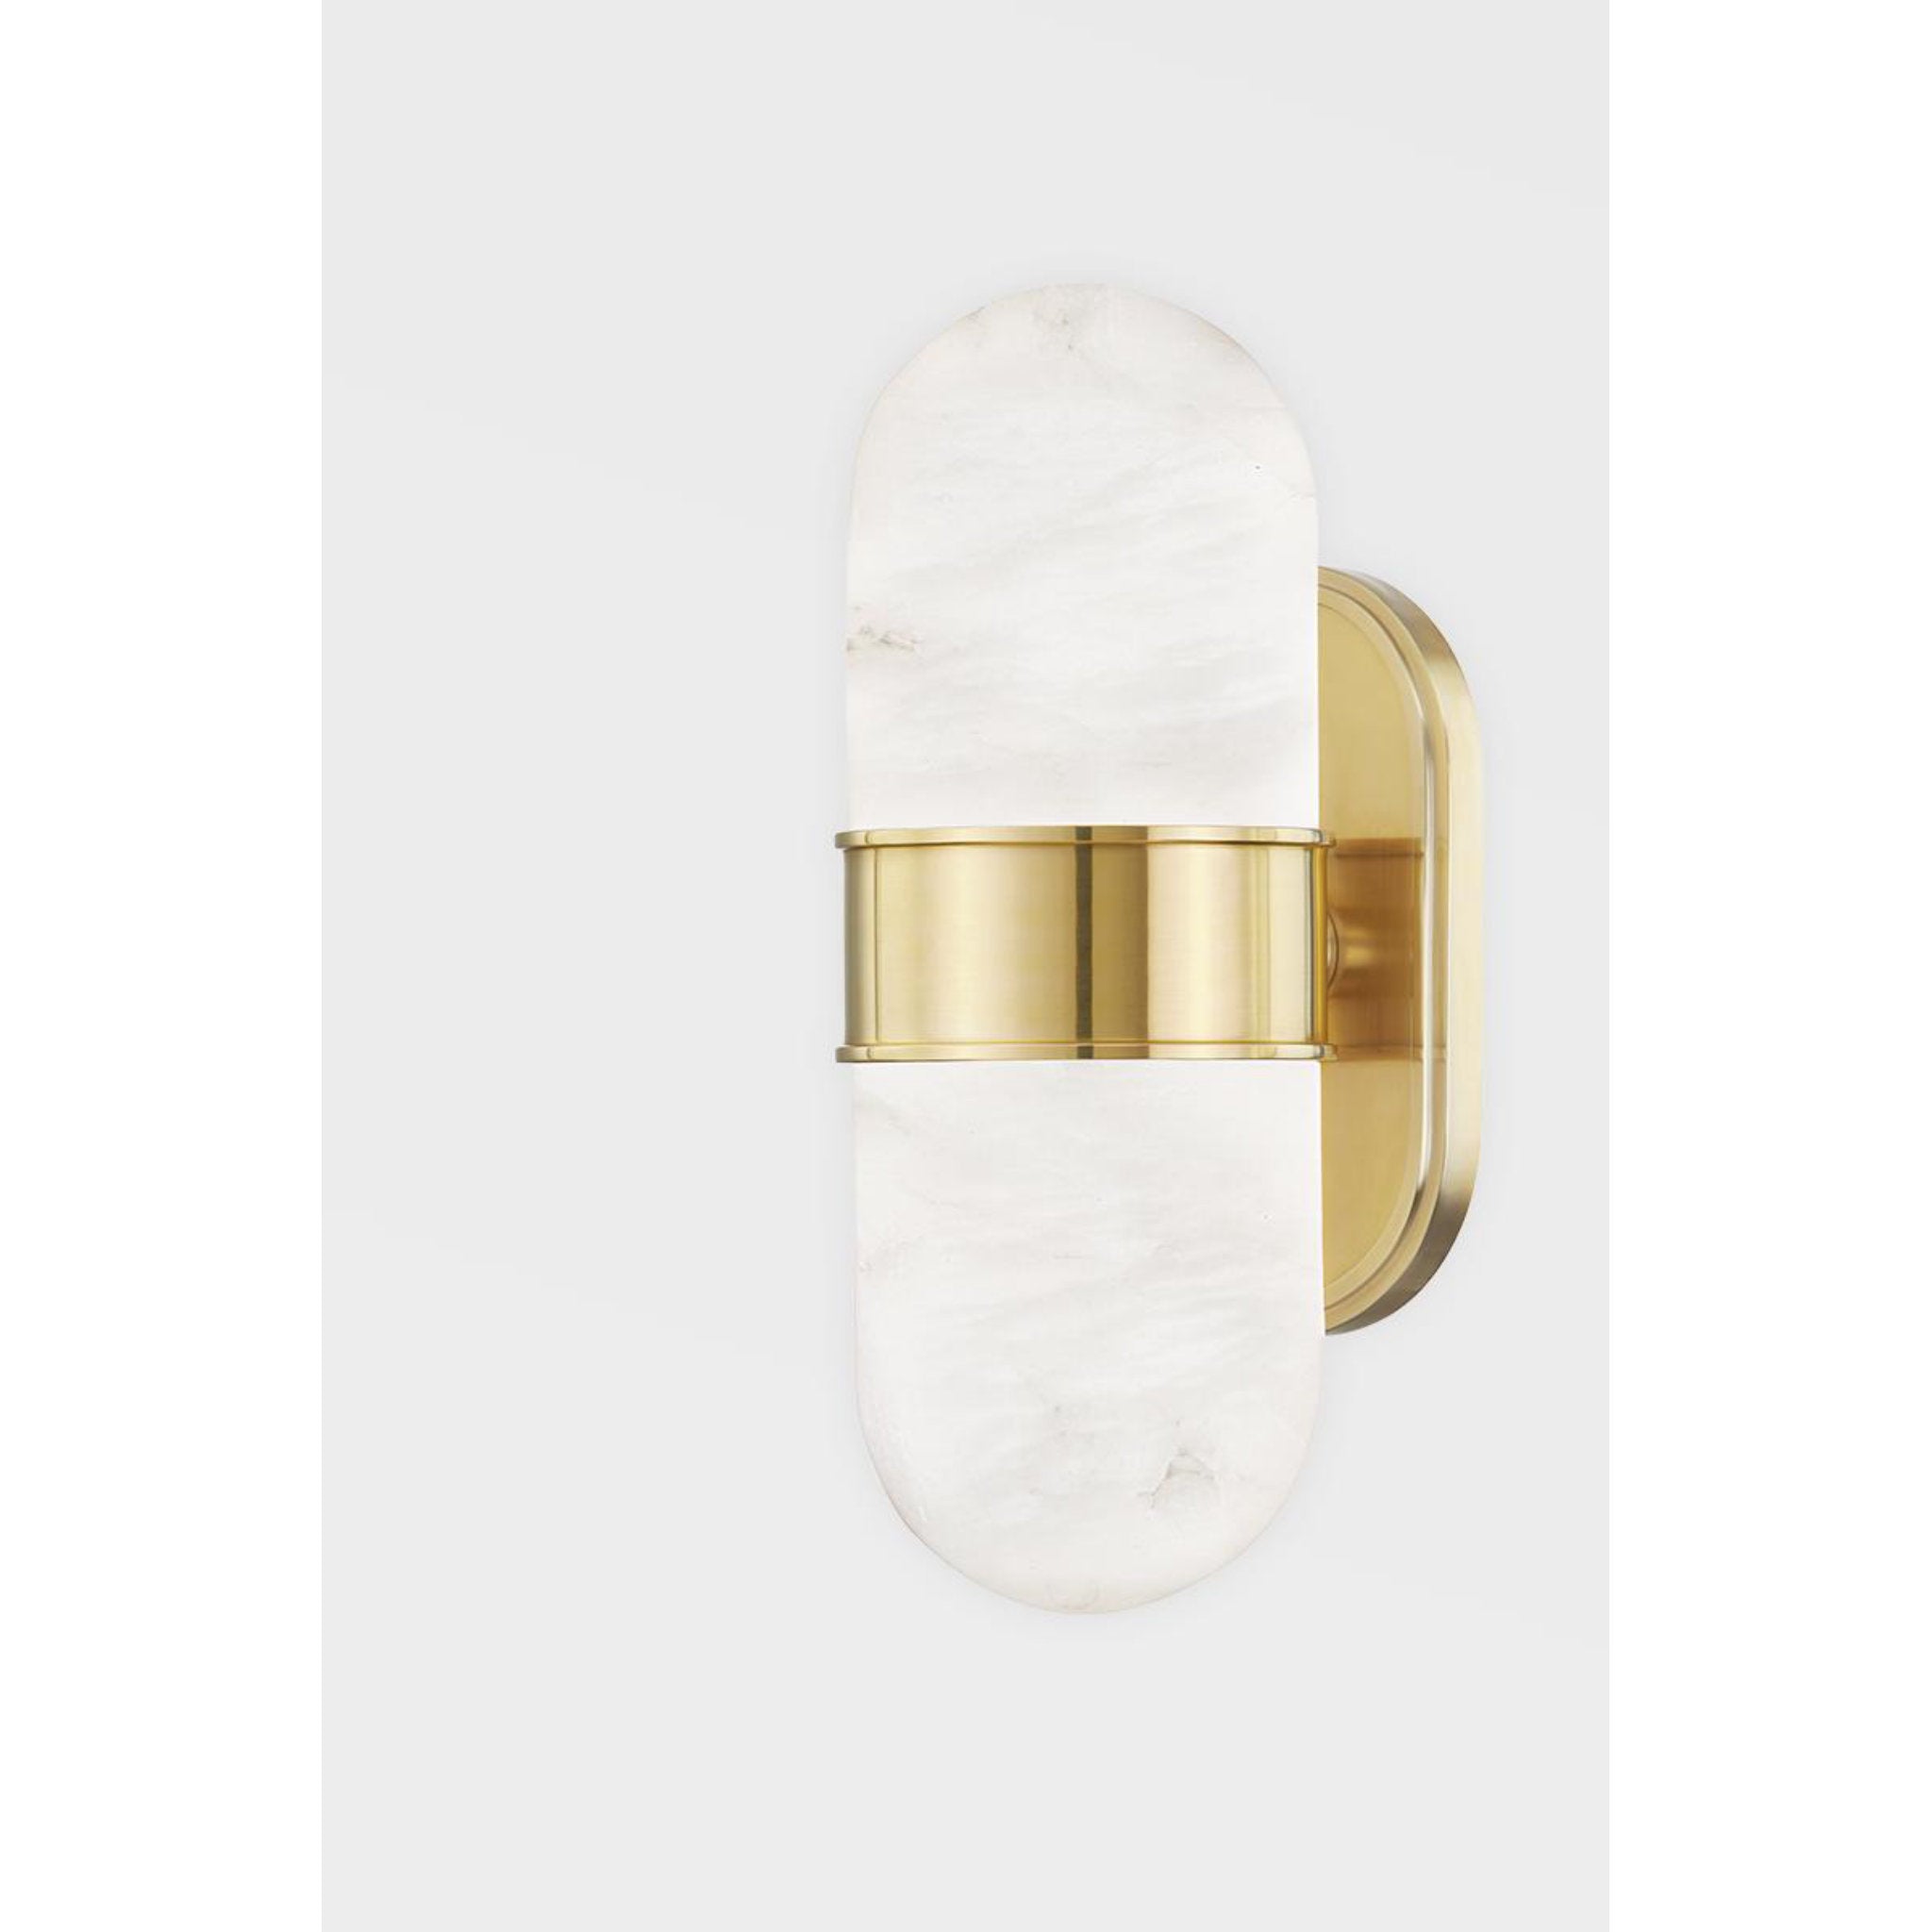 Beckler 2 Light Wall Sconce in Aged Brass